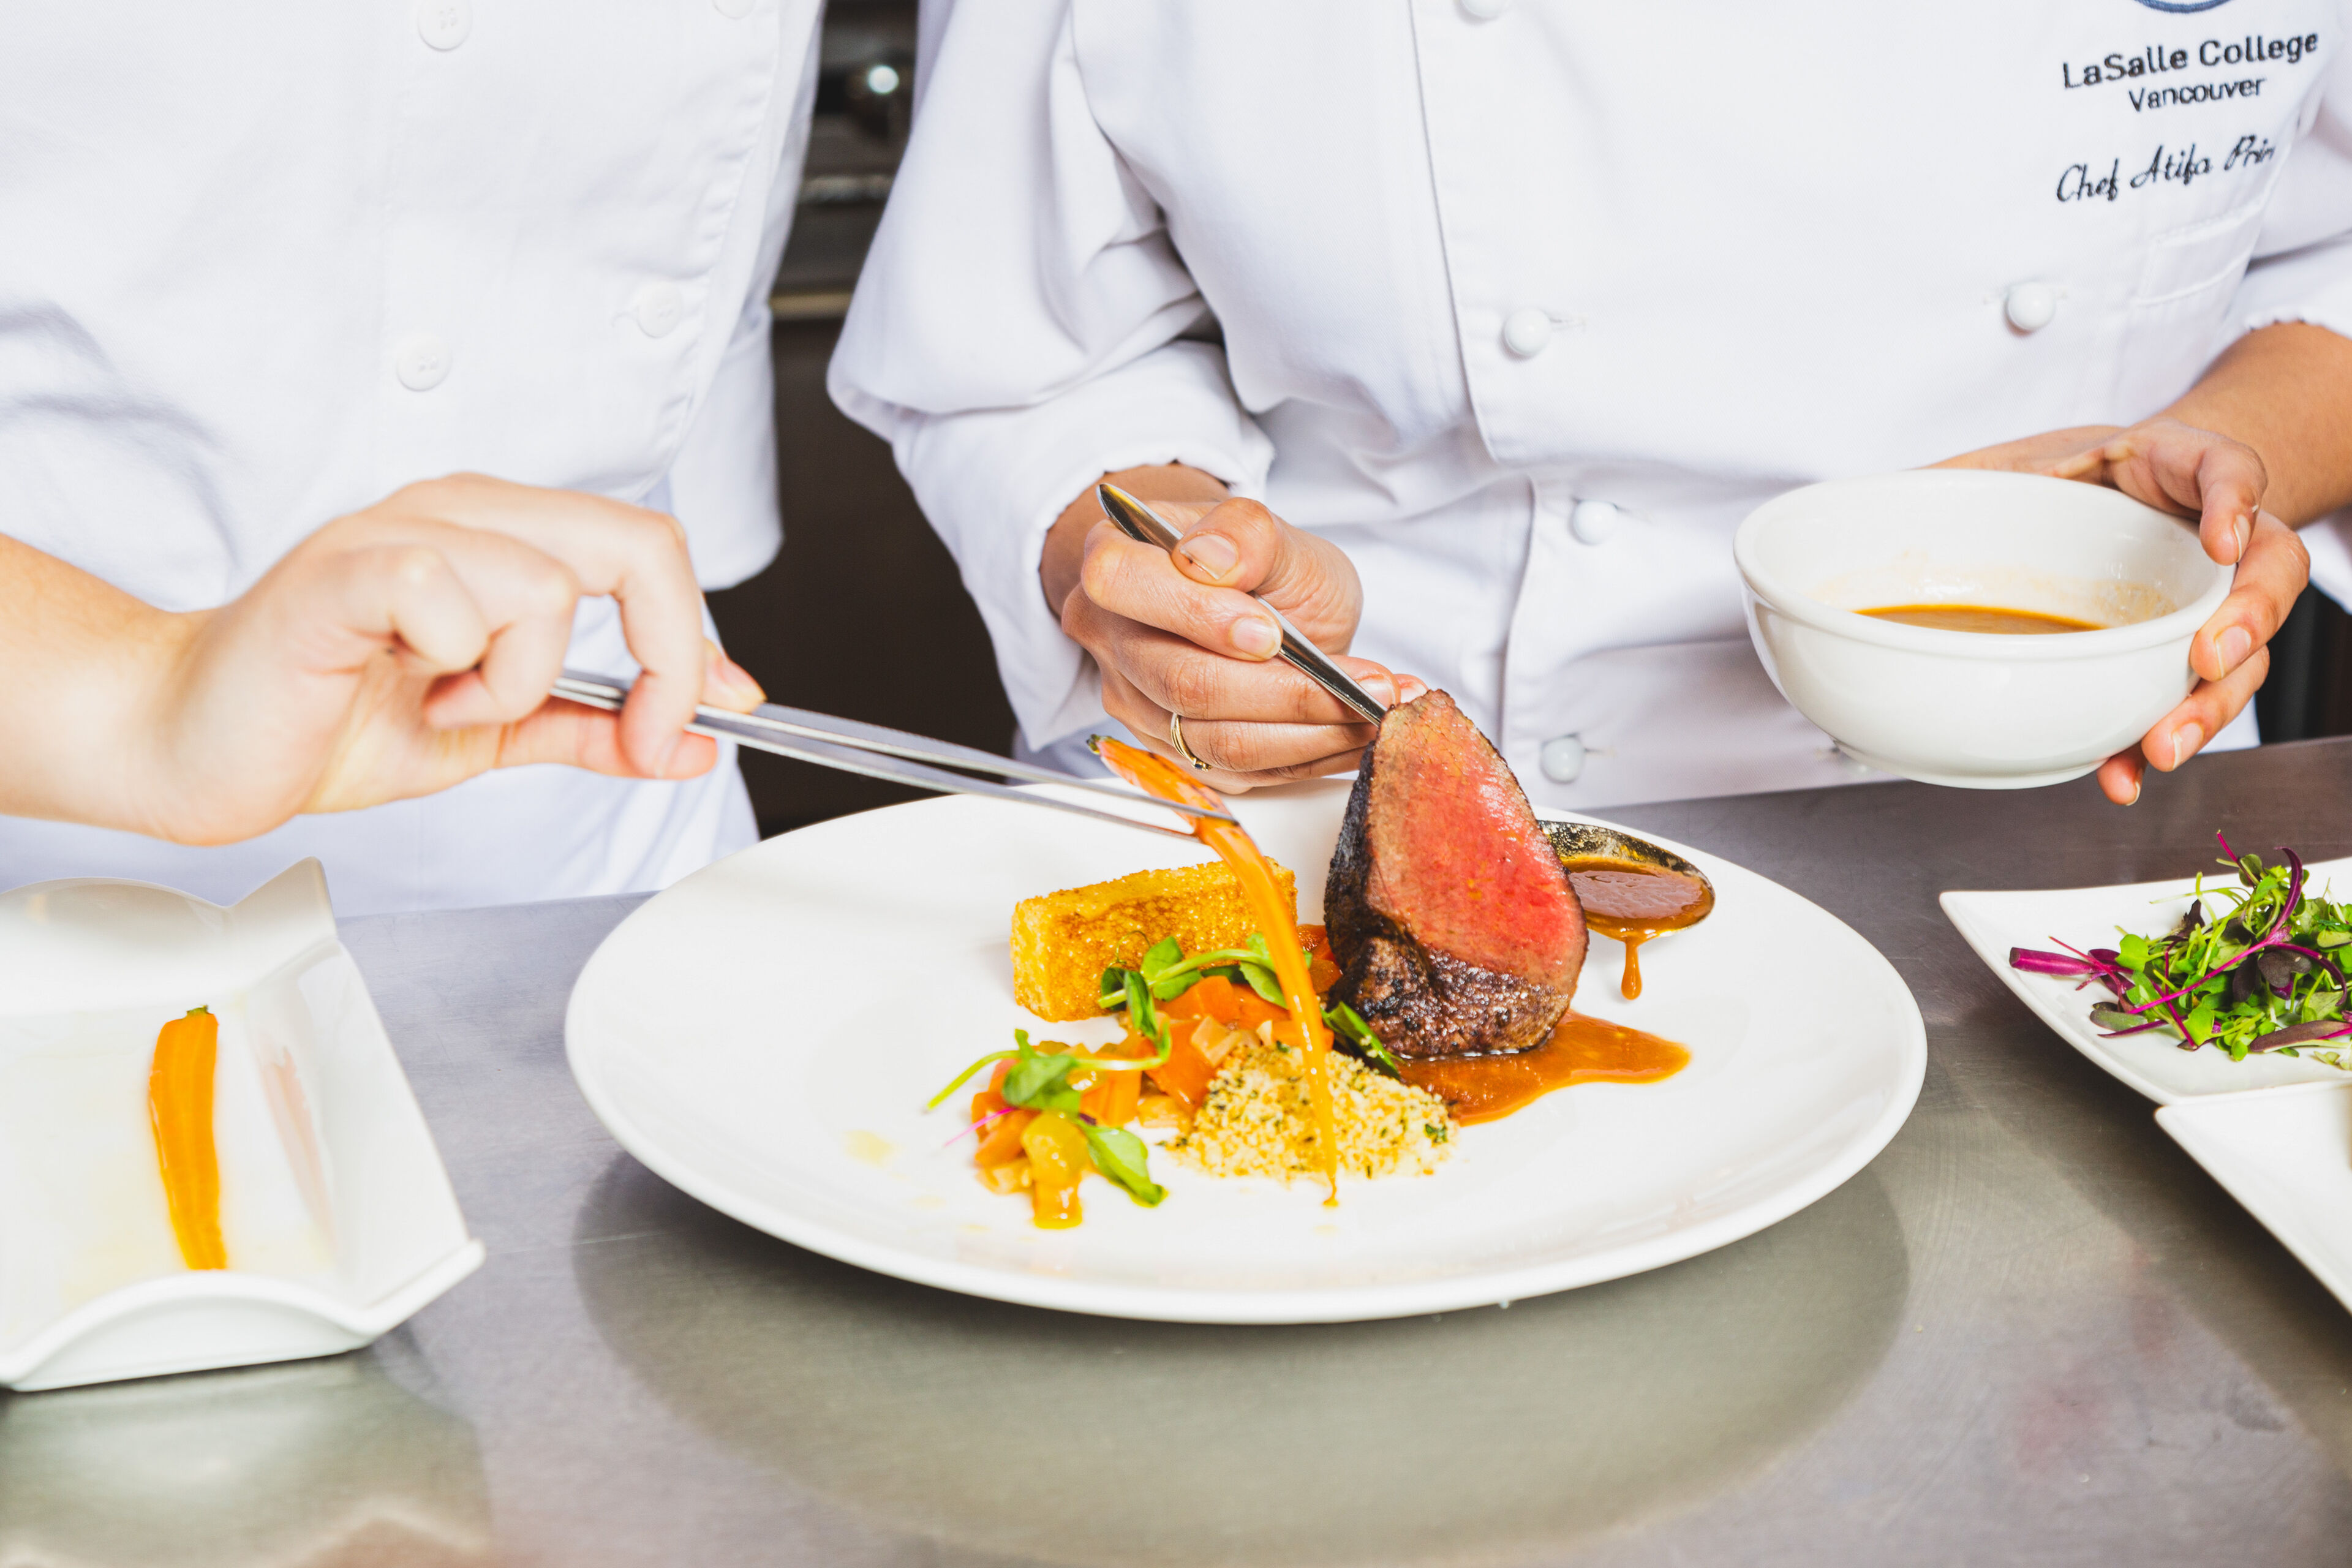 Chef garnishing a medium-rare beef steak with sauce, served with grains and vegetables, in a professional kitchen.